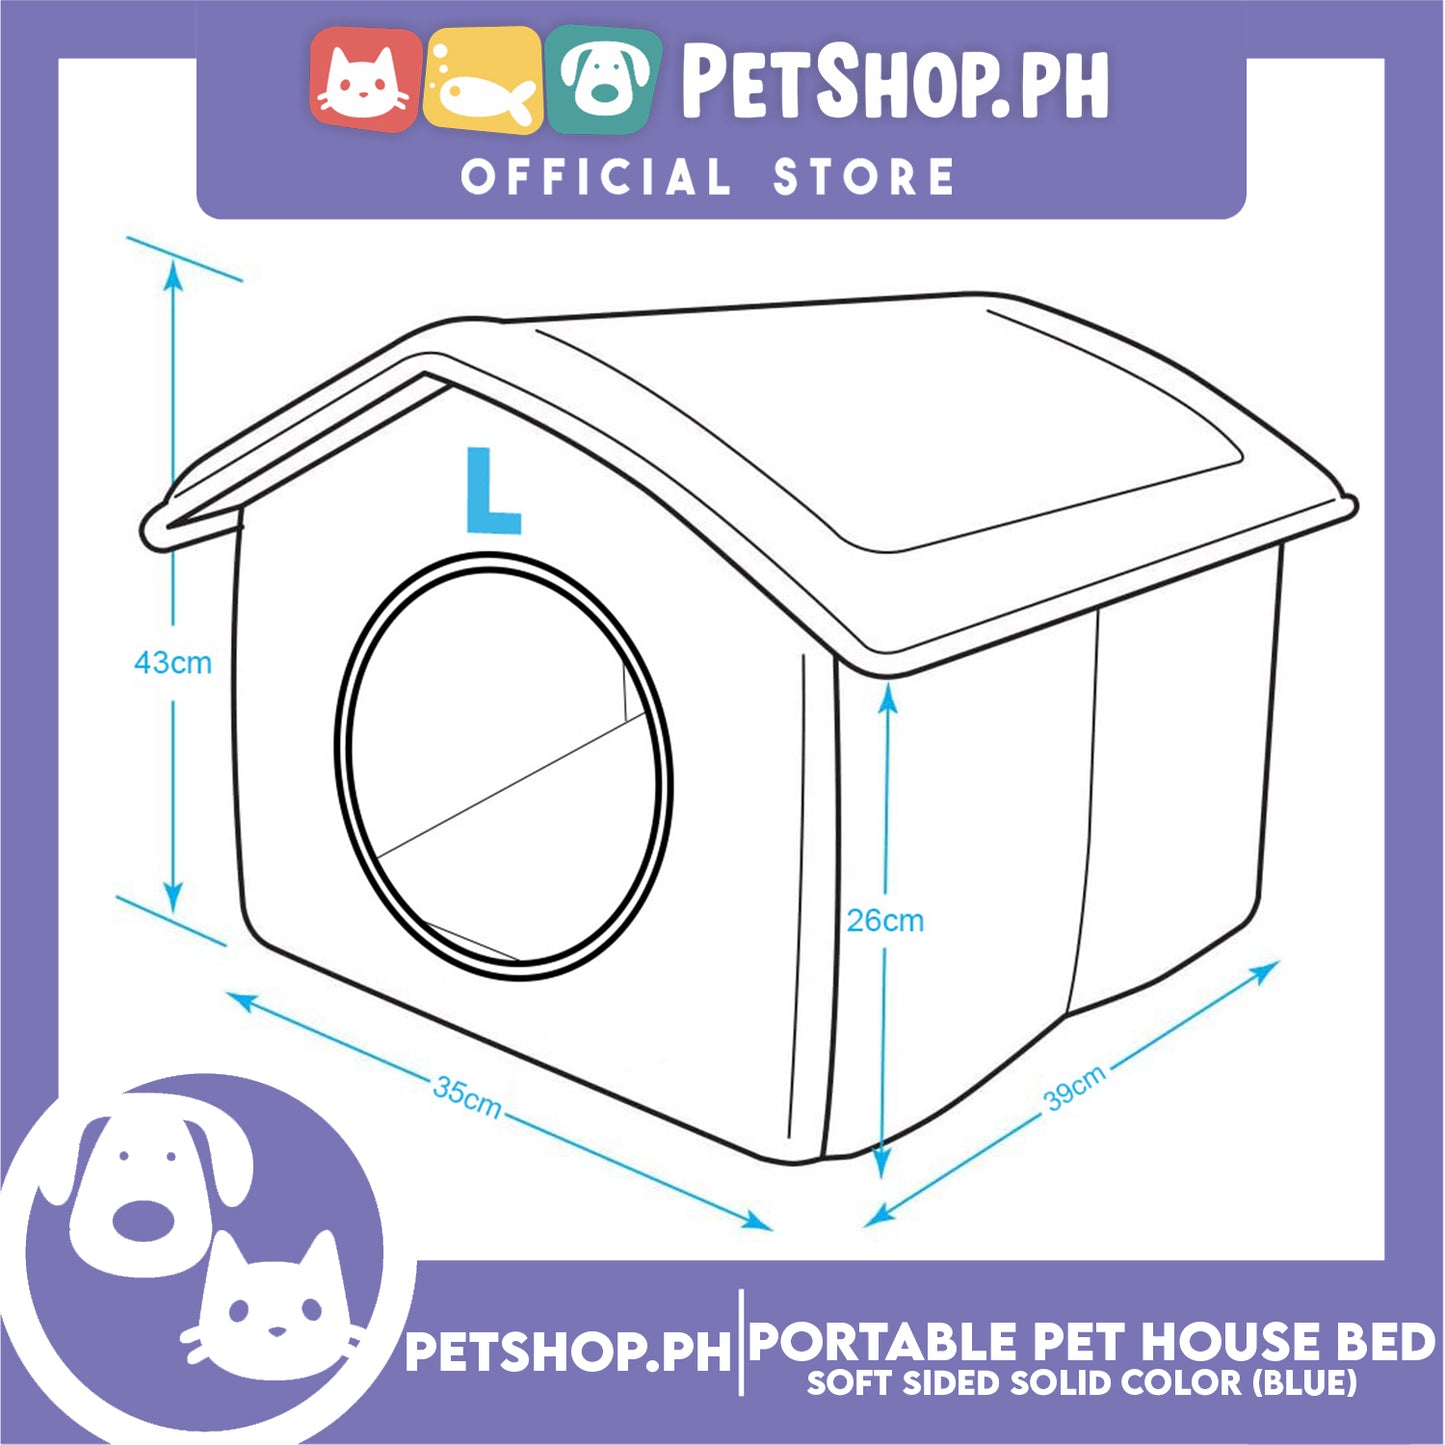 Portable Pet House Bed With Soft Sided Solid Color 35x39x43cm Large (Blue)